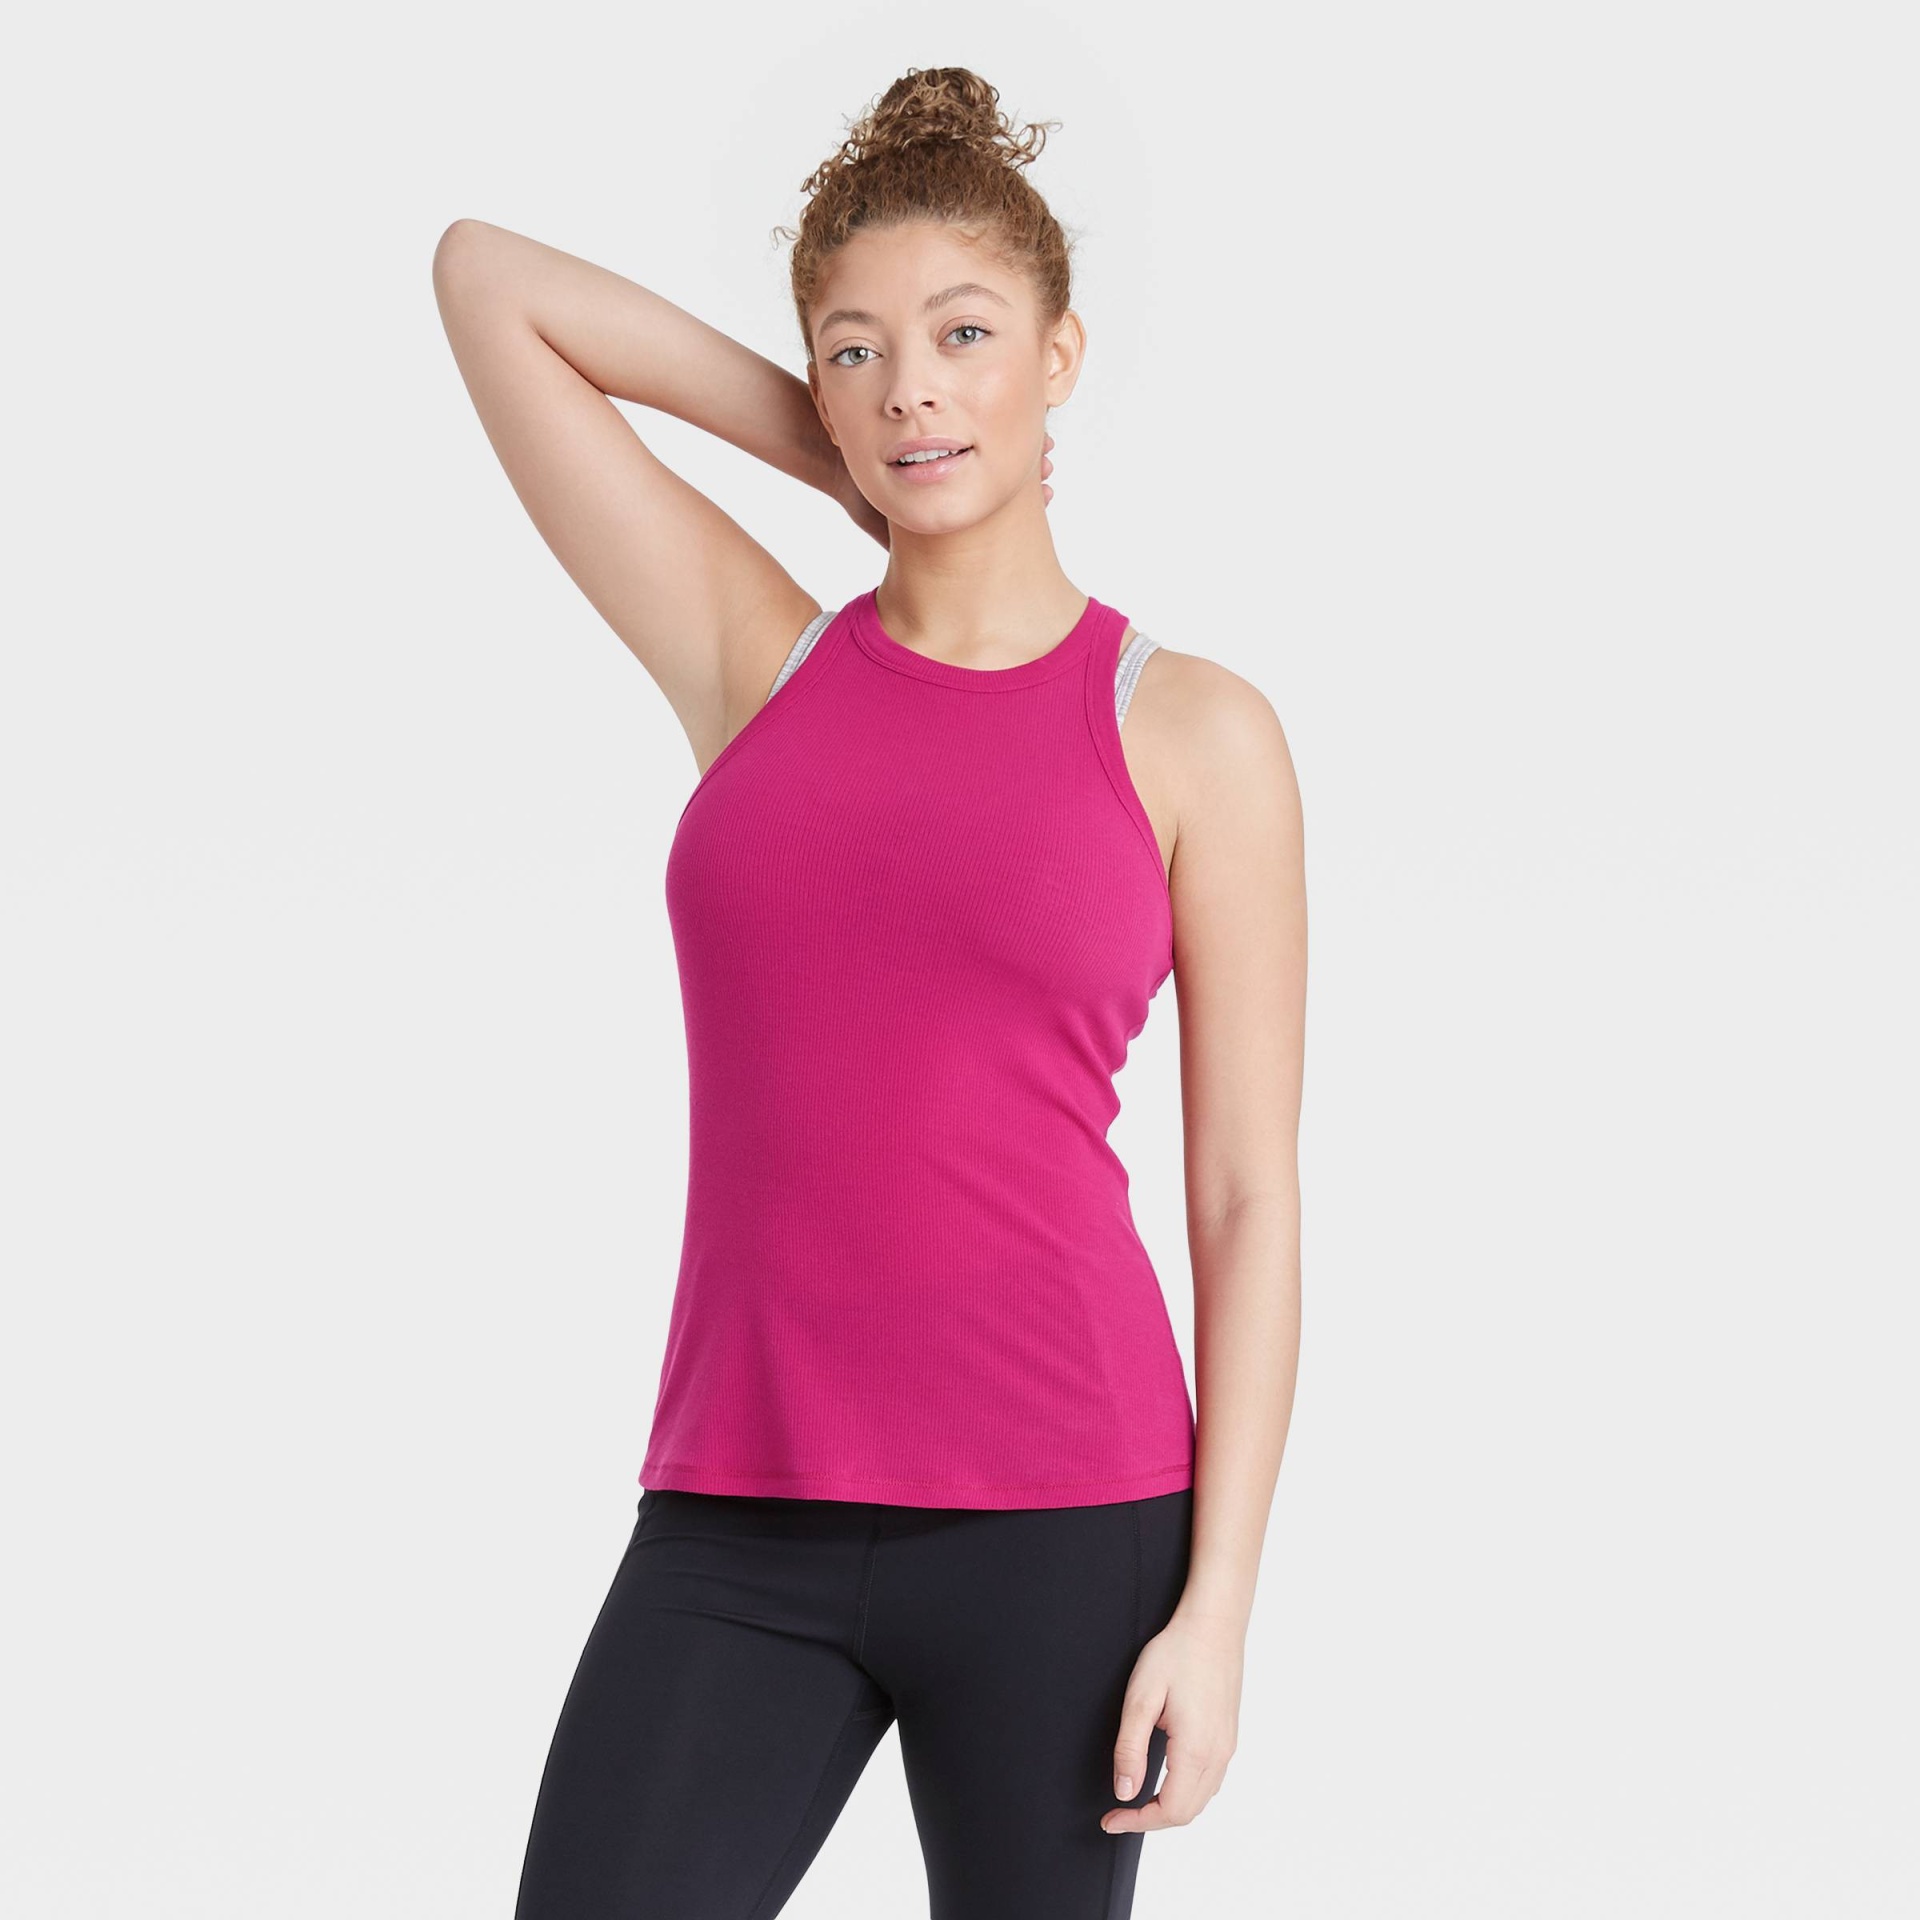 Women's Active Ribbed Tank Top - All in Motion Cranberry XL 1 ct